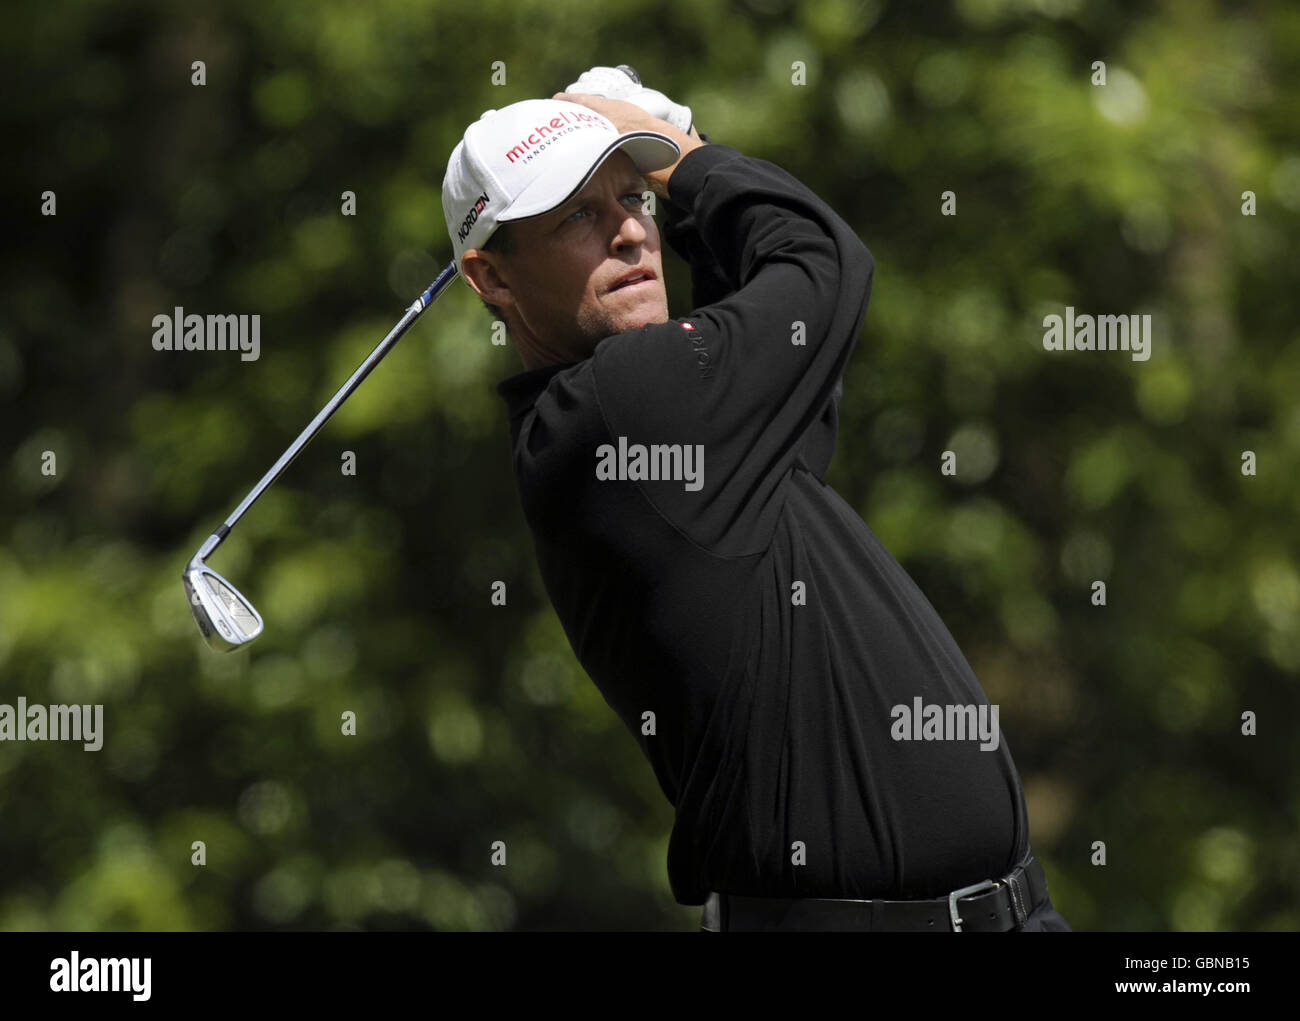 Denmark's Anders Hansen tees off the 2nd hole during Round 2 of the BMW PGA Championship at Wentworth Golf Club, Surrey. Stock Photo